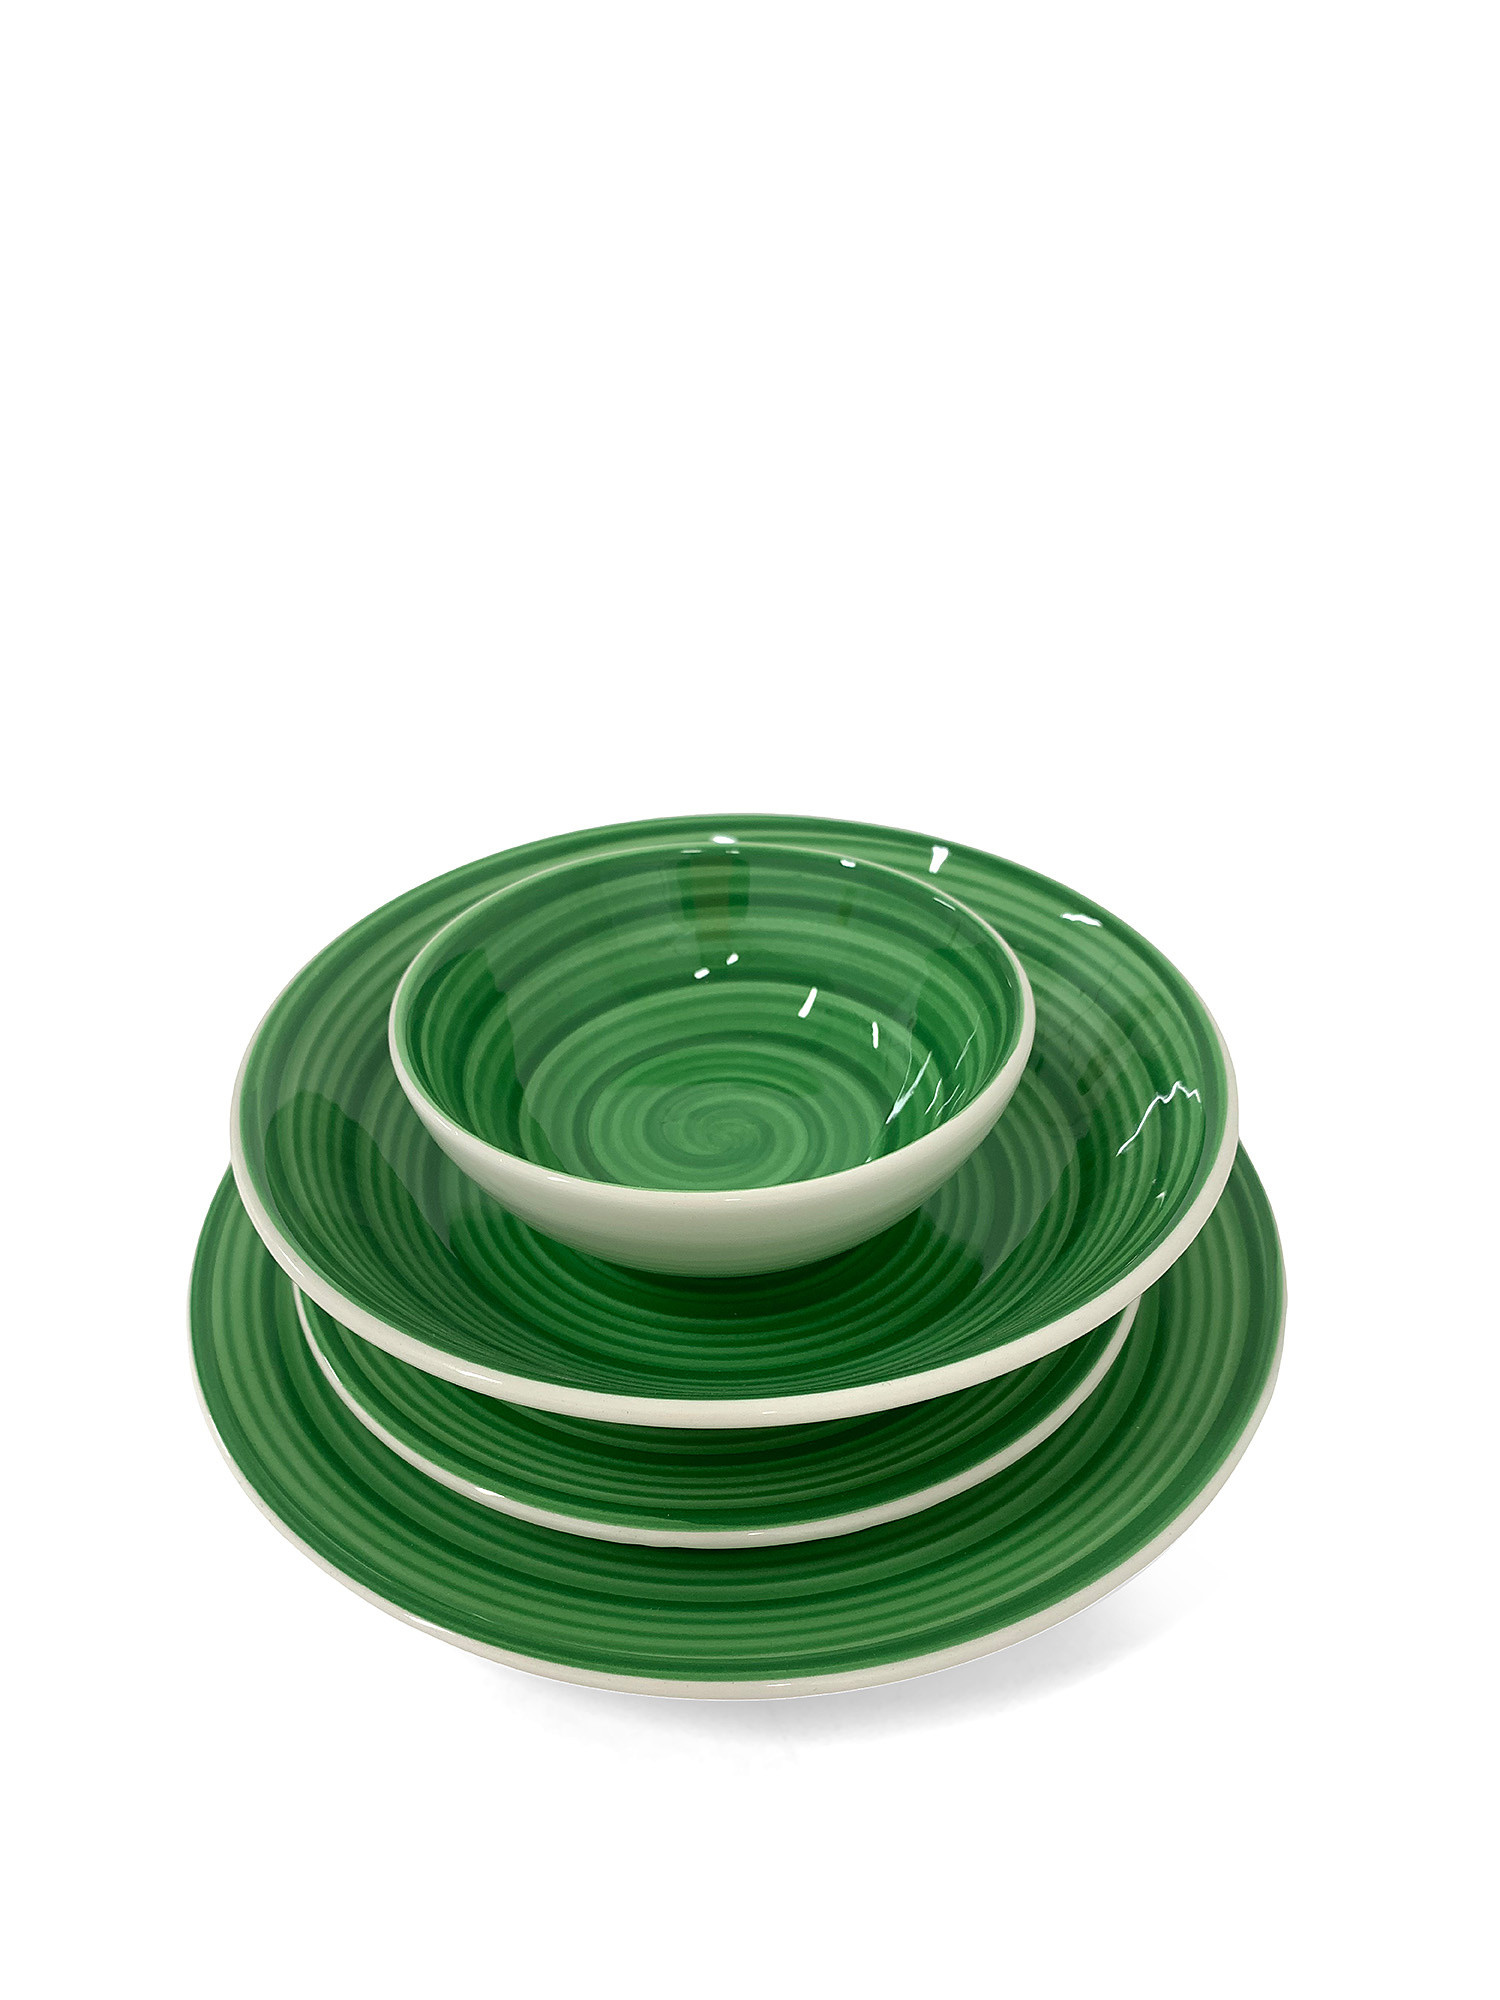 Spiral hand painted ceramic soup plate, Green, large image number 1